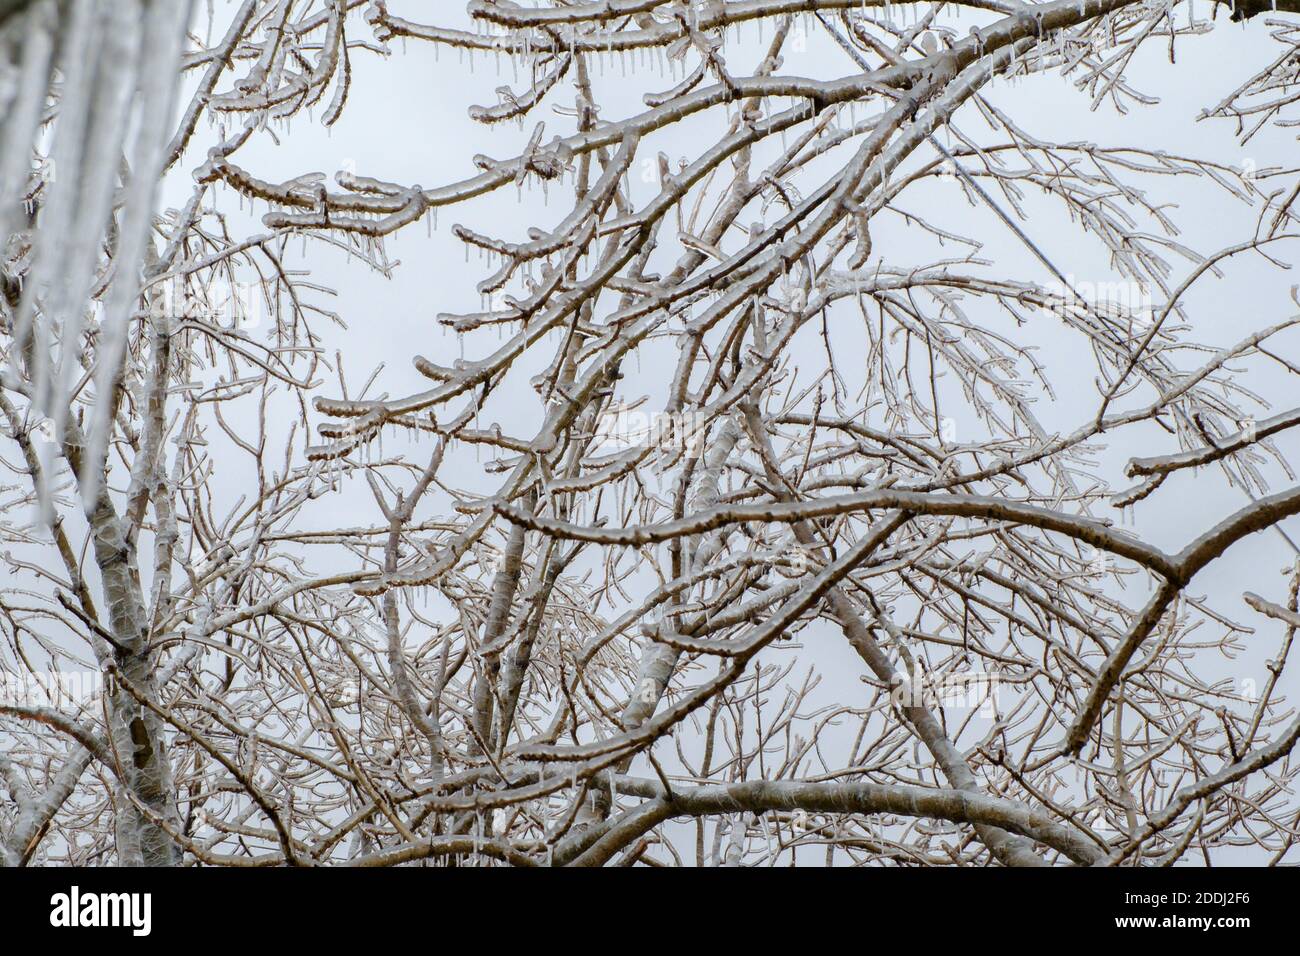 Freezing rain. Icy tree branches after an icy rain. Natural disaster. Selective focus. Stock Photo